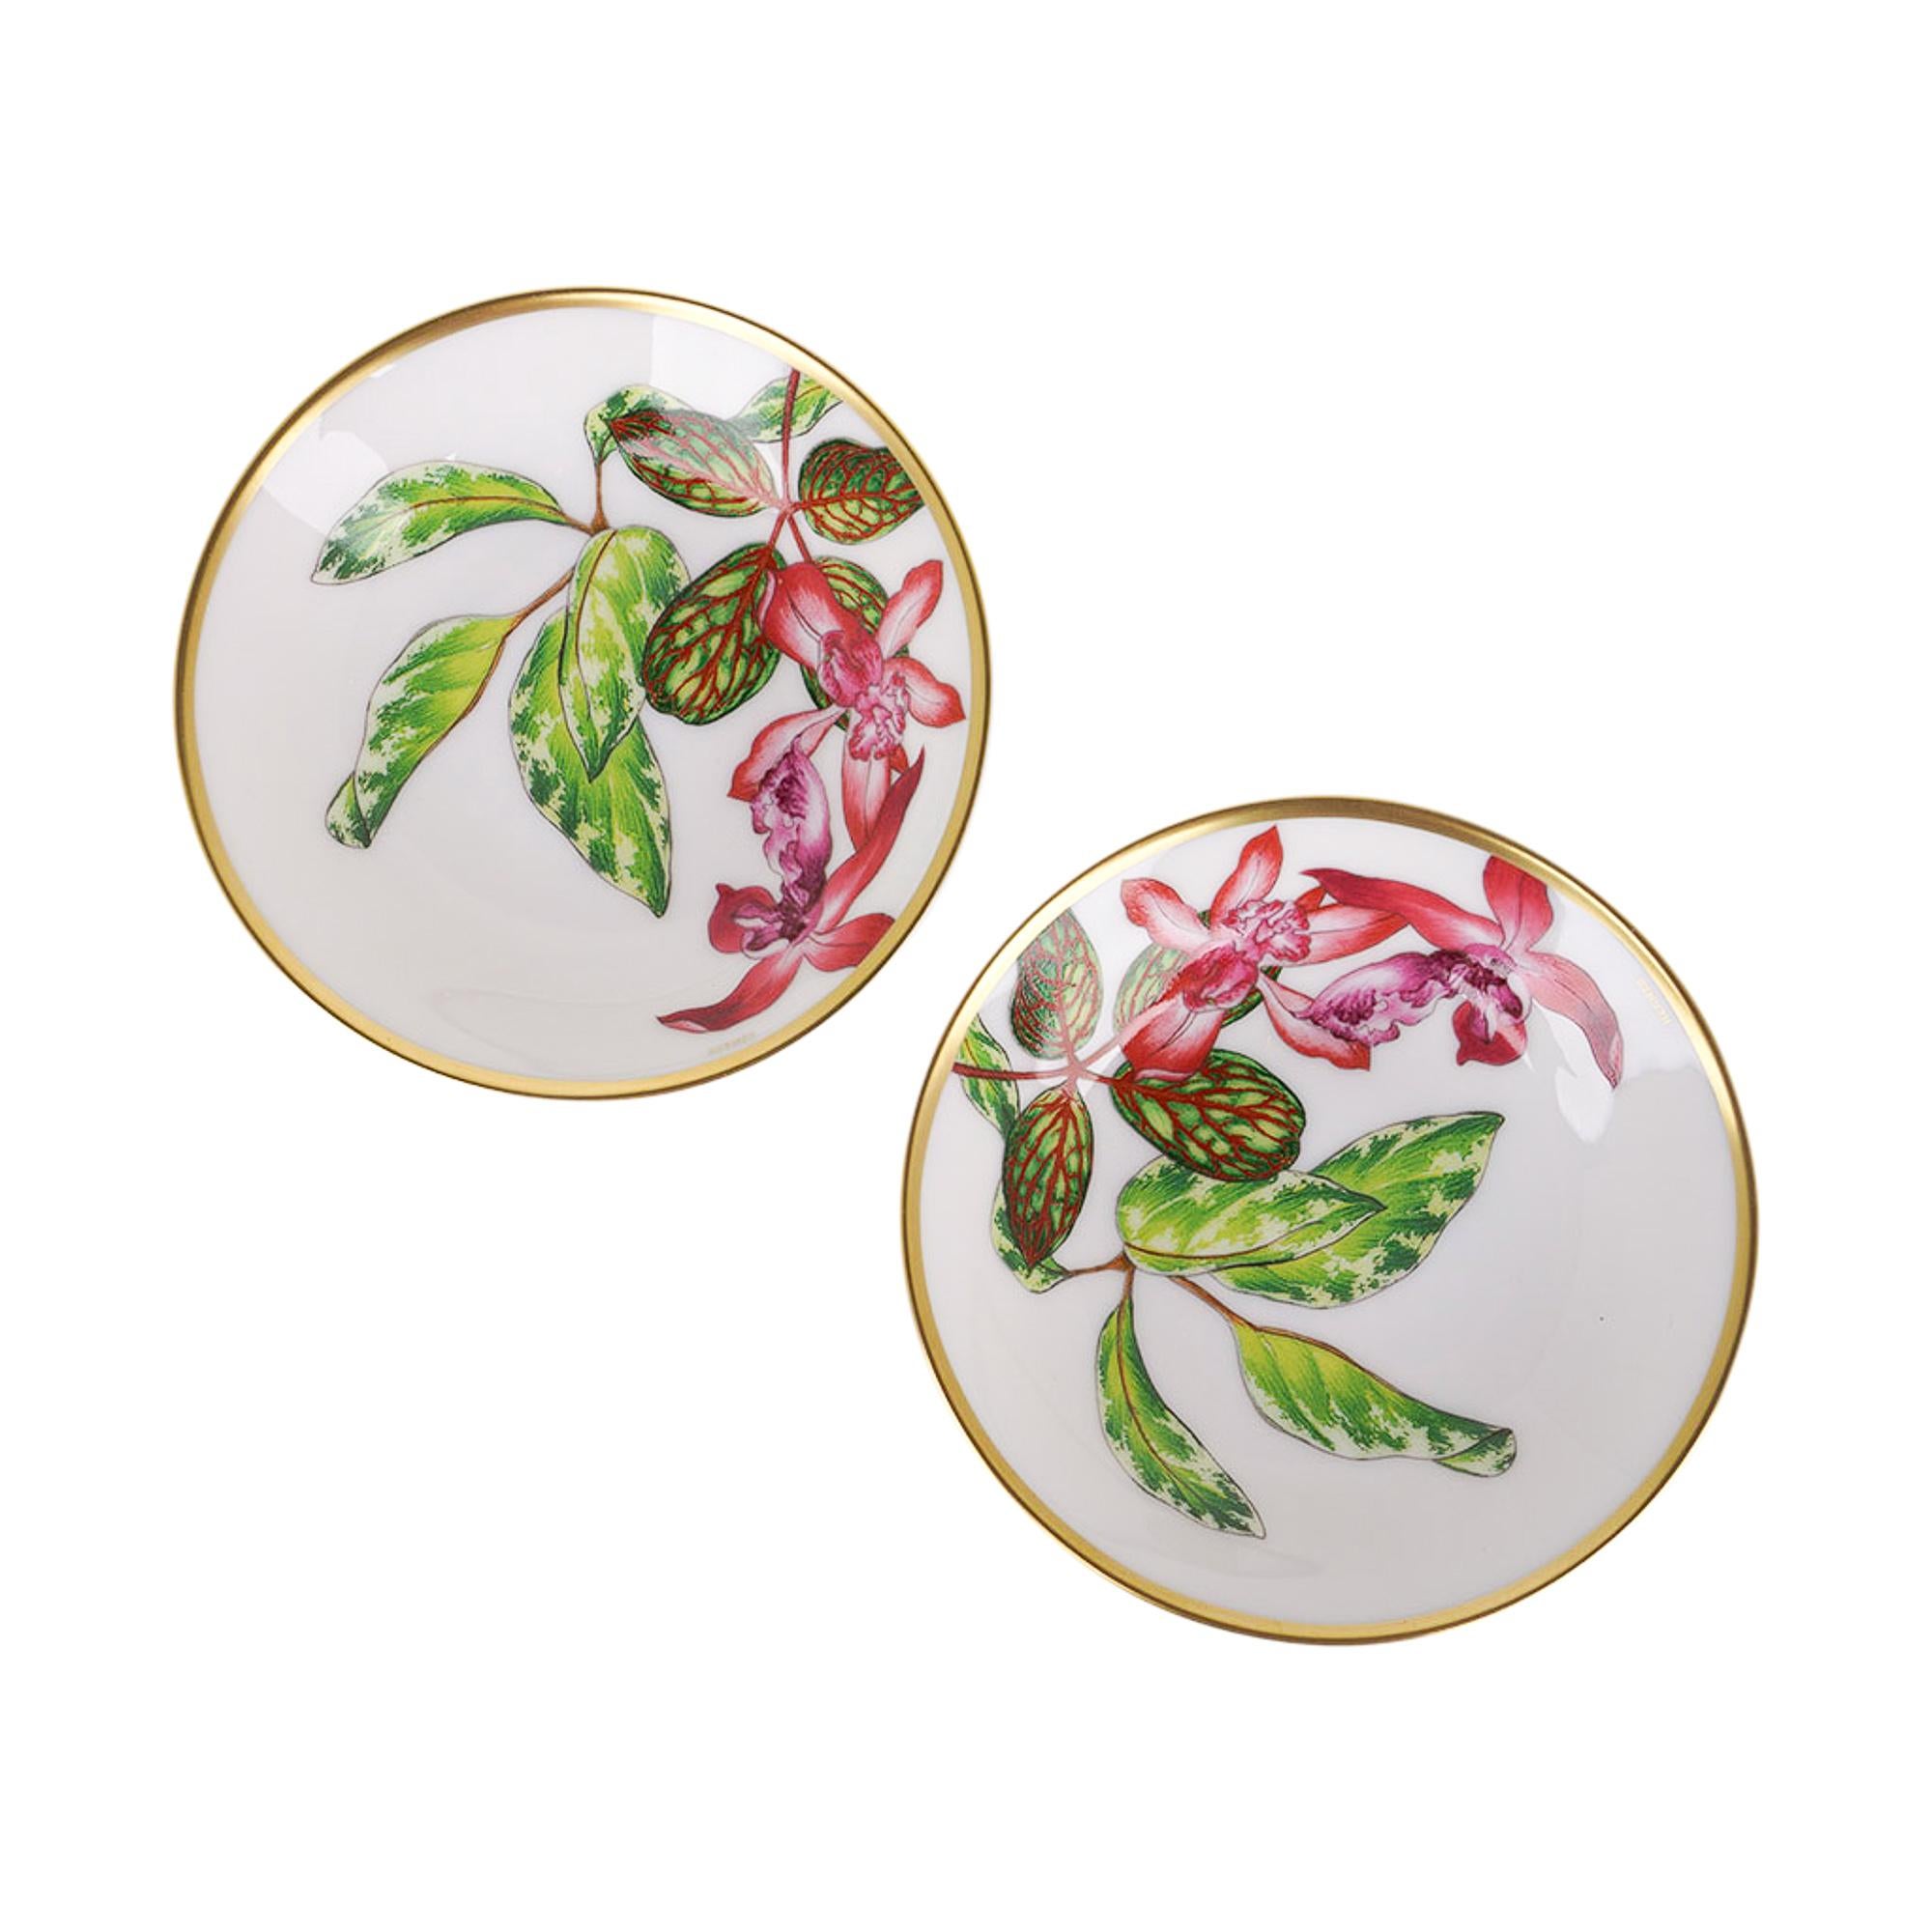 Mightychic offers an  Hermes Soy Dish / Sushi Plate featured in the classic Hermes Passifolia pattern.
A beautiful hommage to the peace and power of flora.
Decorated using Chromolithography.
Hand-painted 24K gold trim.
(Please note: total of 4 bowls